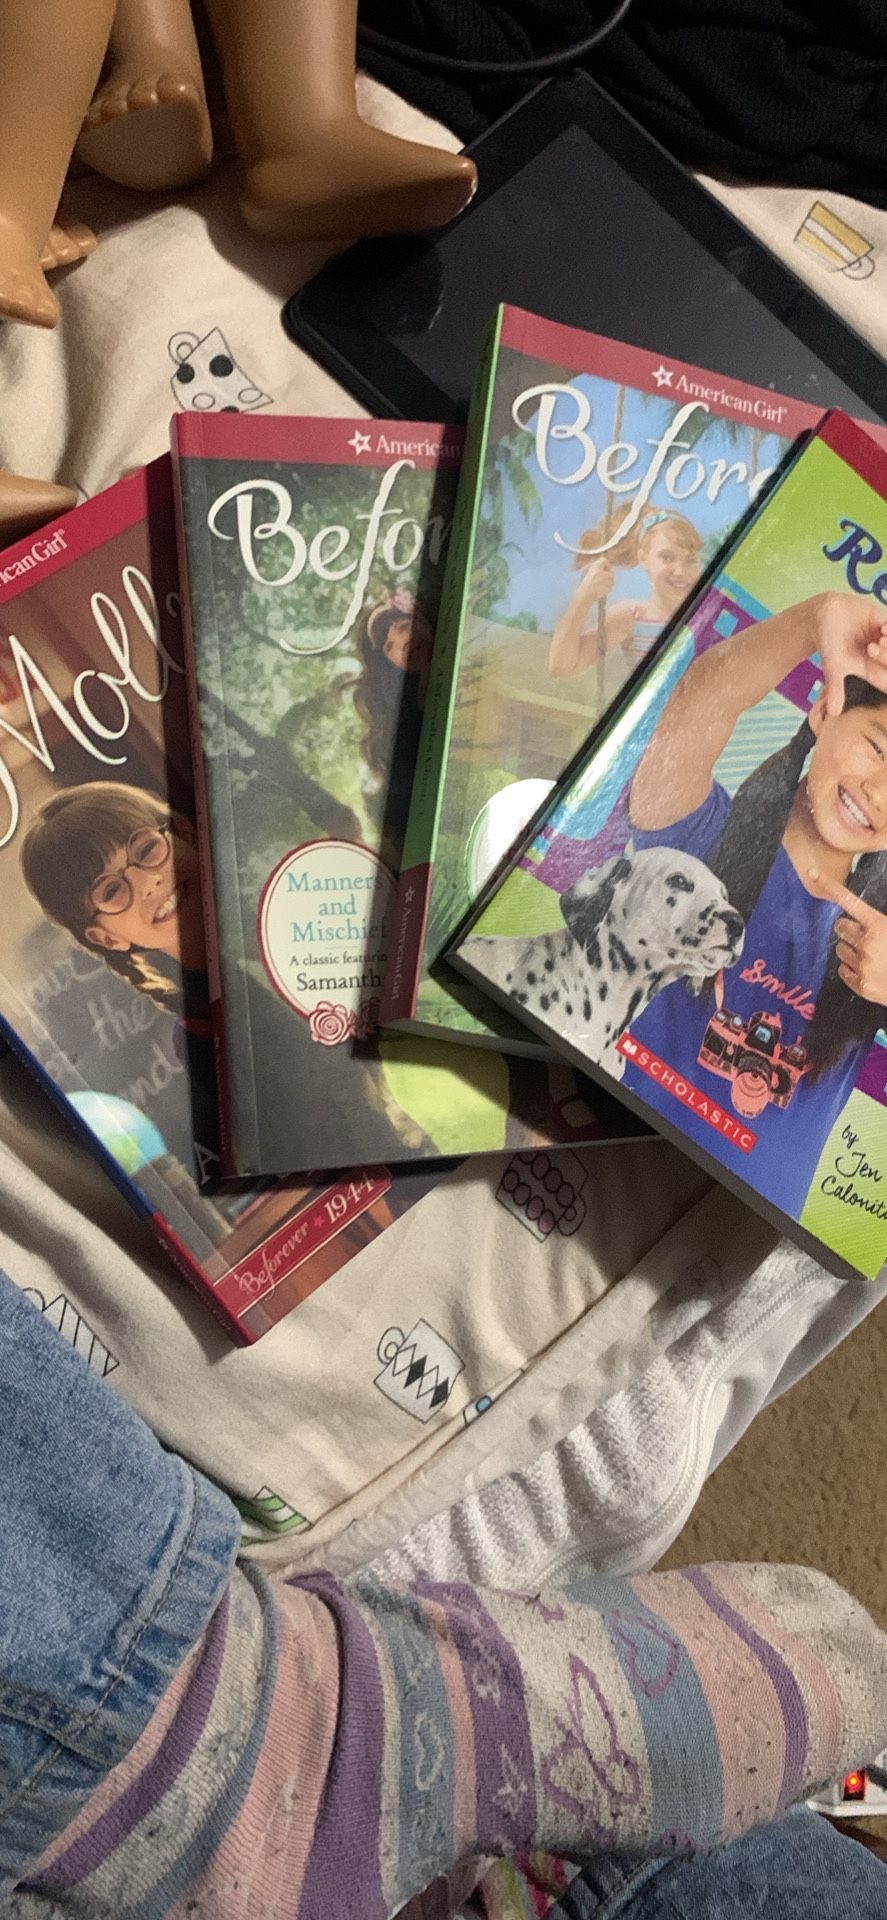 American Girl official books, Z, Maryellen, Samantha, and Molly